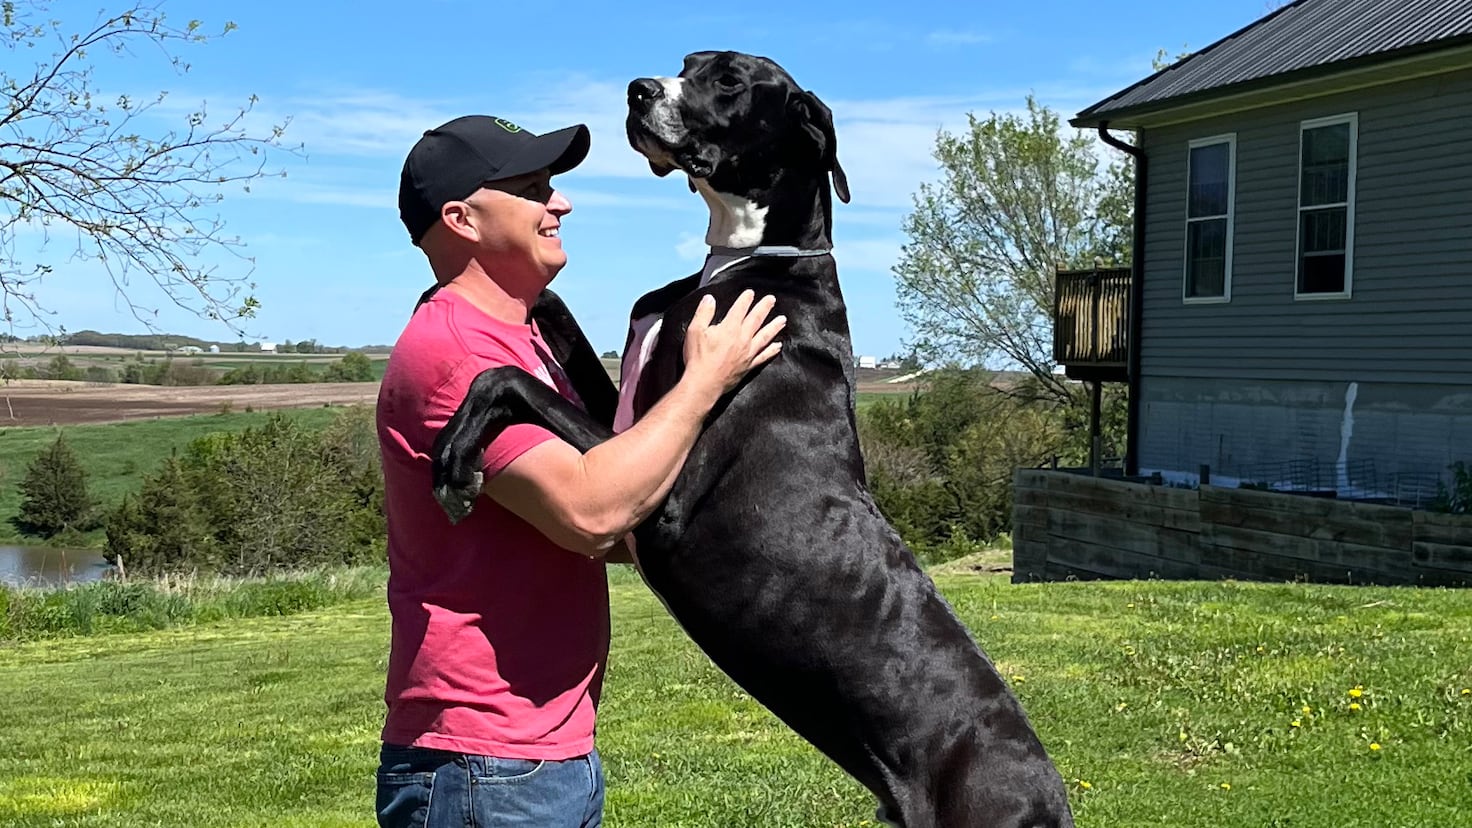 The height of the Iowa Great Dane, the largest dog in the world
